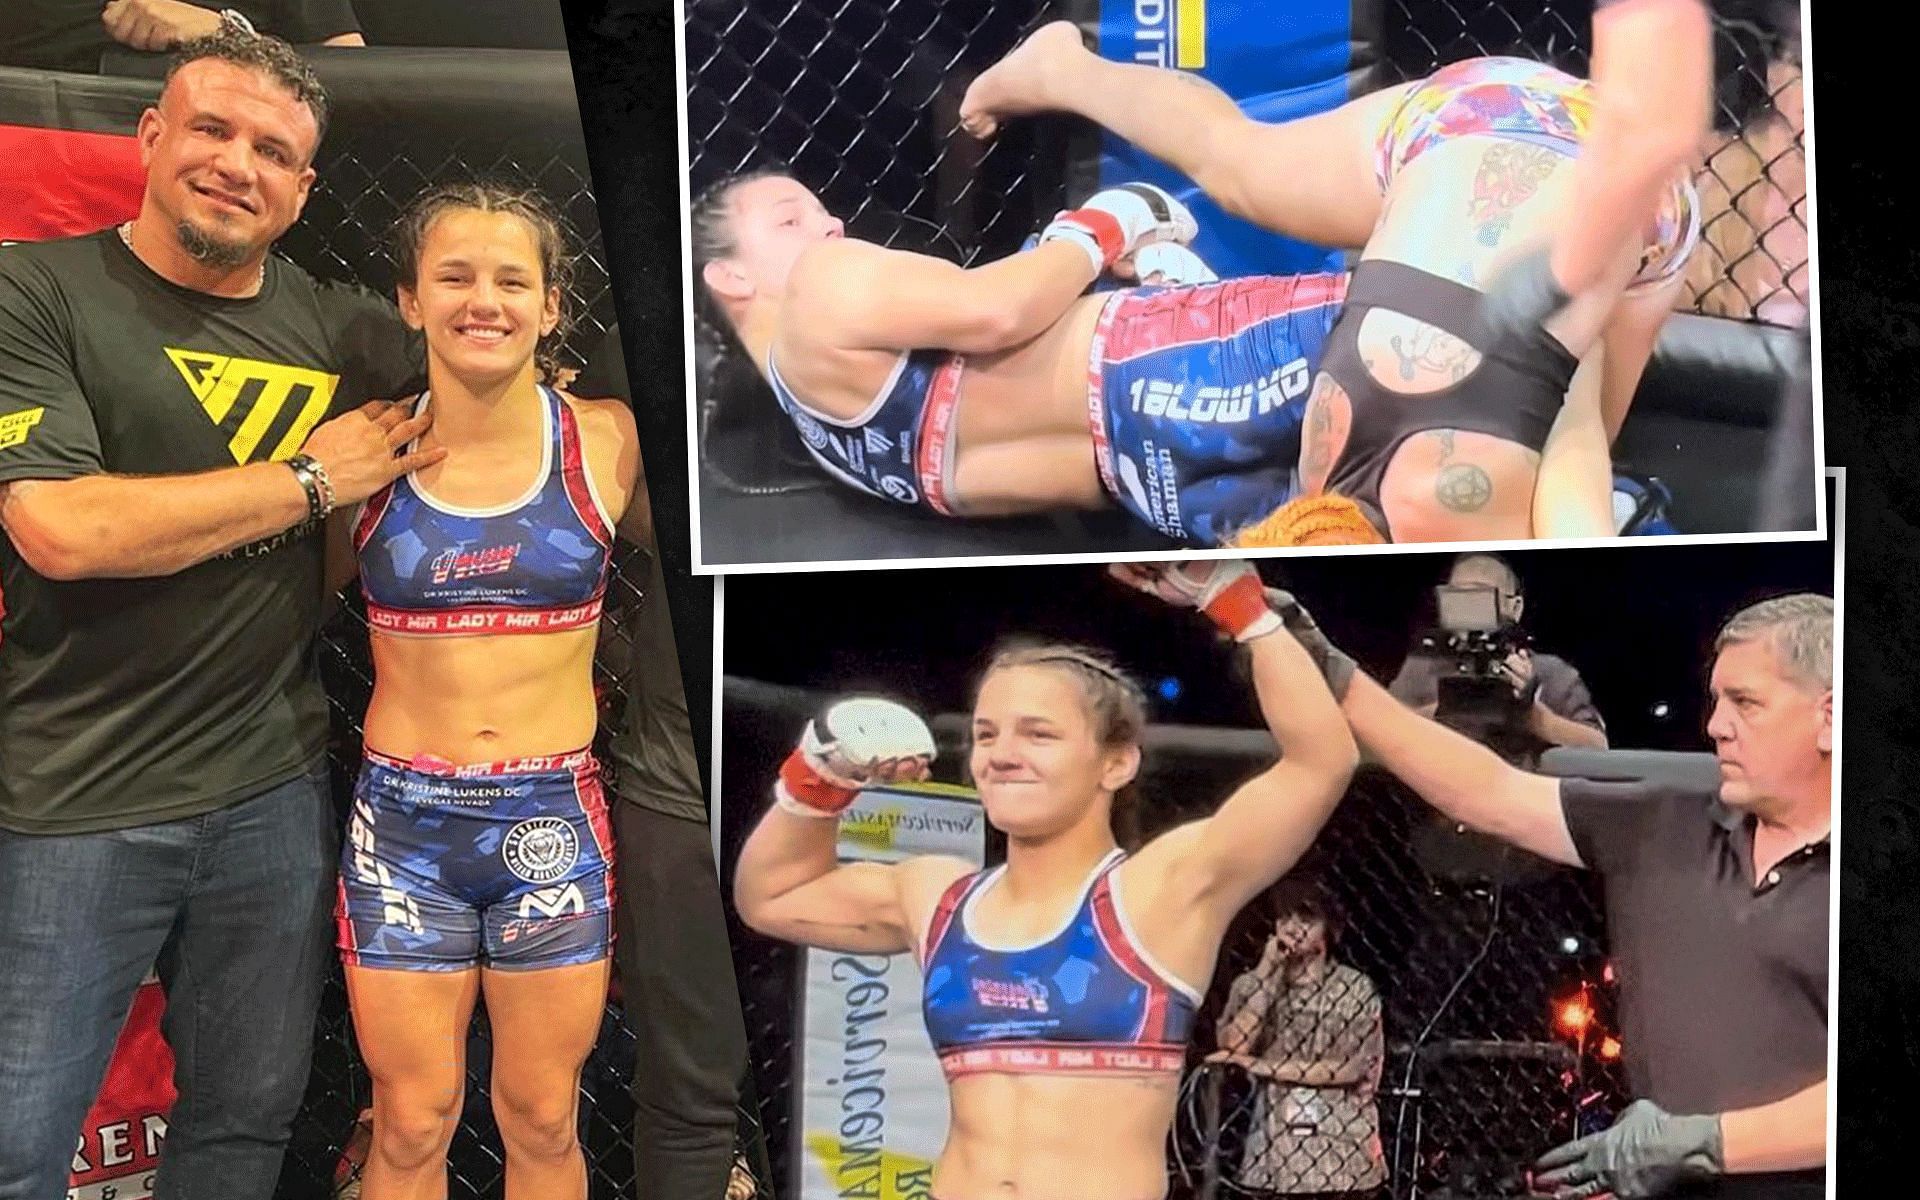 Bella Mir picked up her third pro win [Images via @ladymir11 on Instgram]